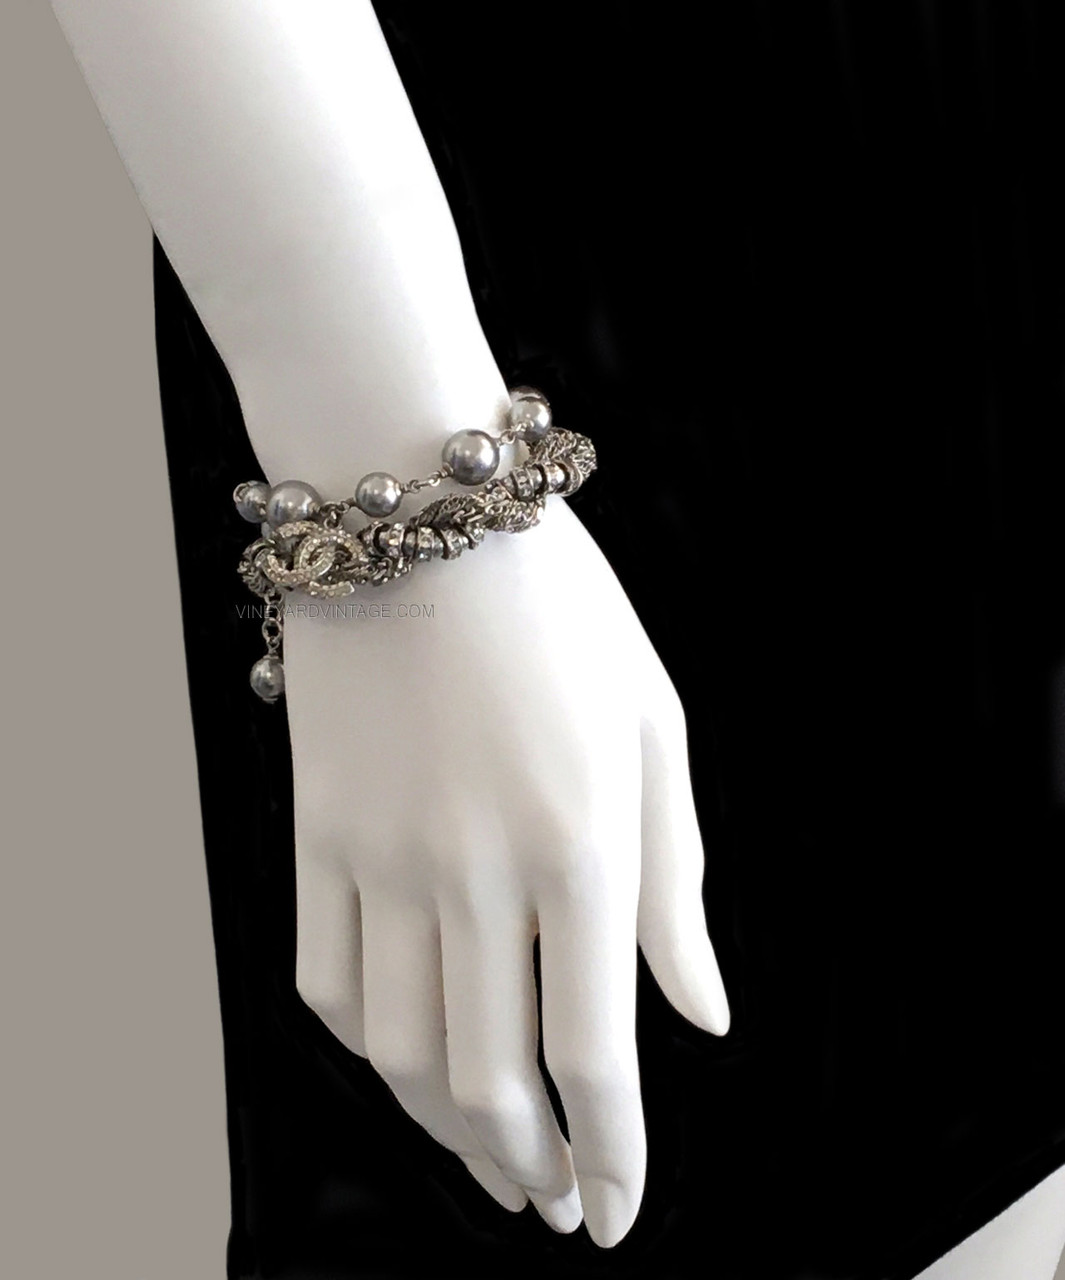 Double white pearls bracelet with gilded silver details